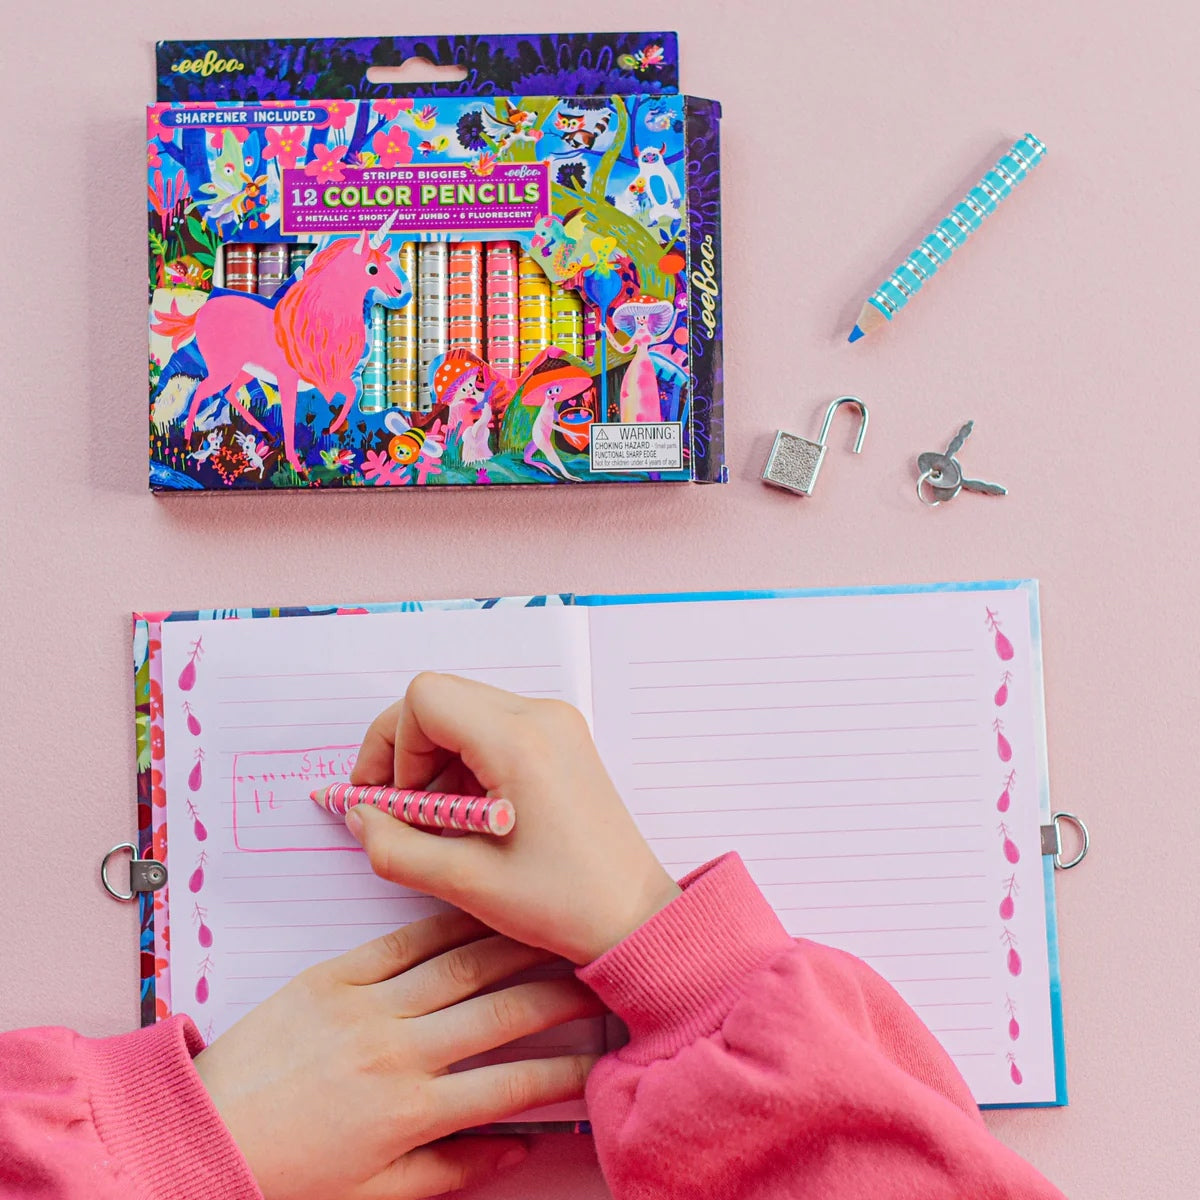 Child wearing a pink sweater writing in a journal with a pink fluorescent pencil